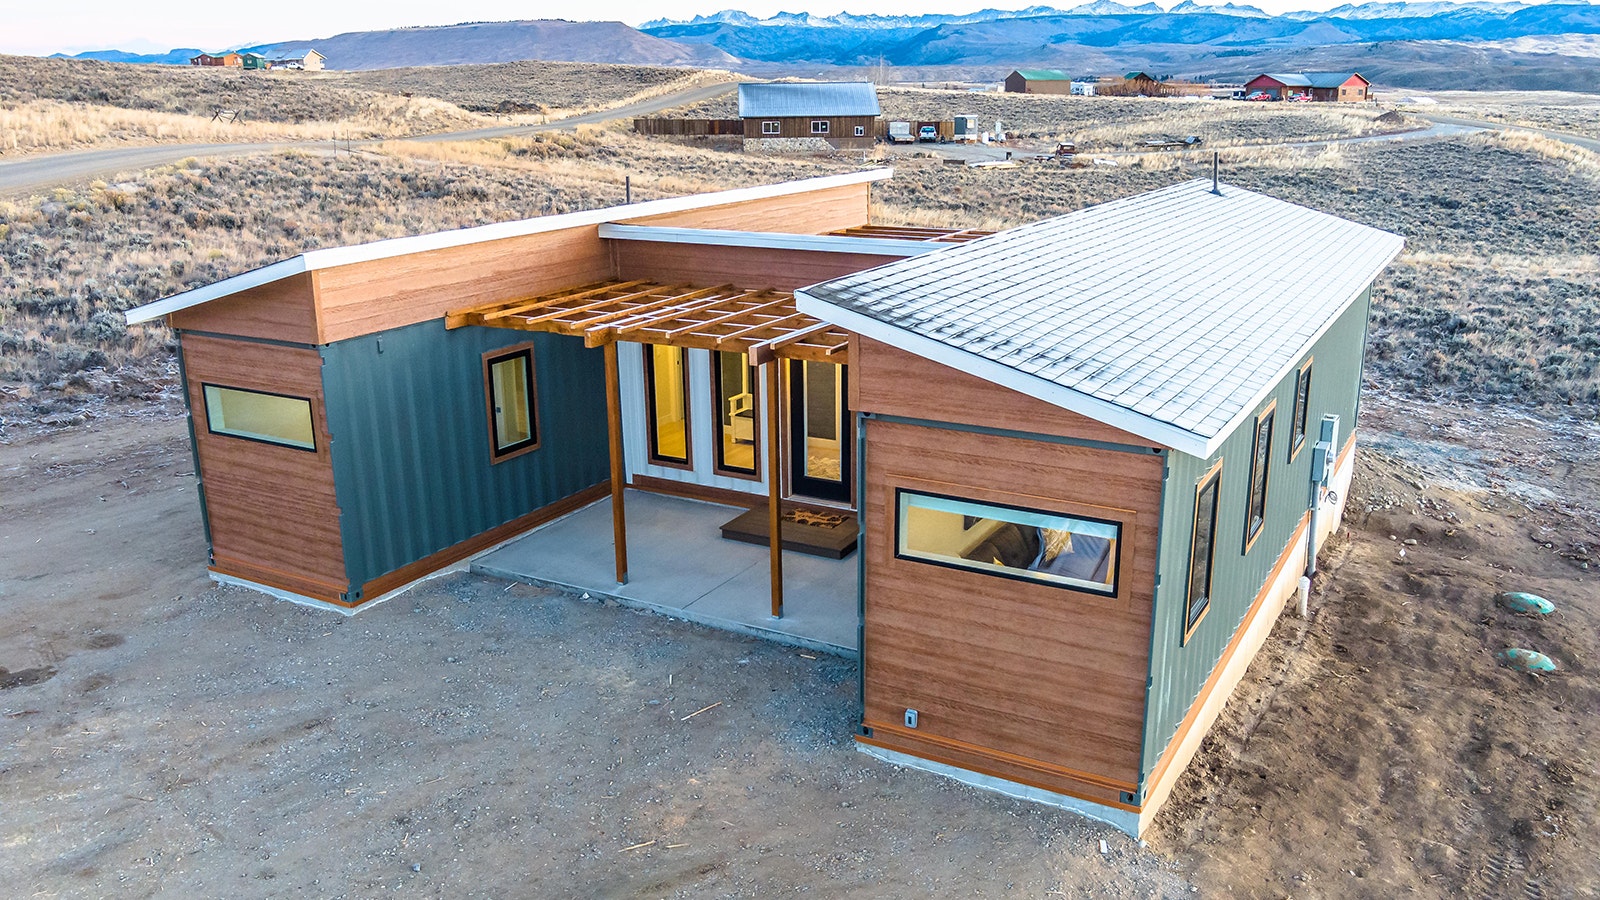 This 800-square-foot home is built from three steel shipping containers in an H configuration.